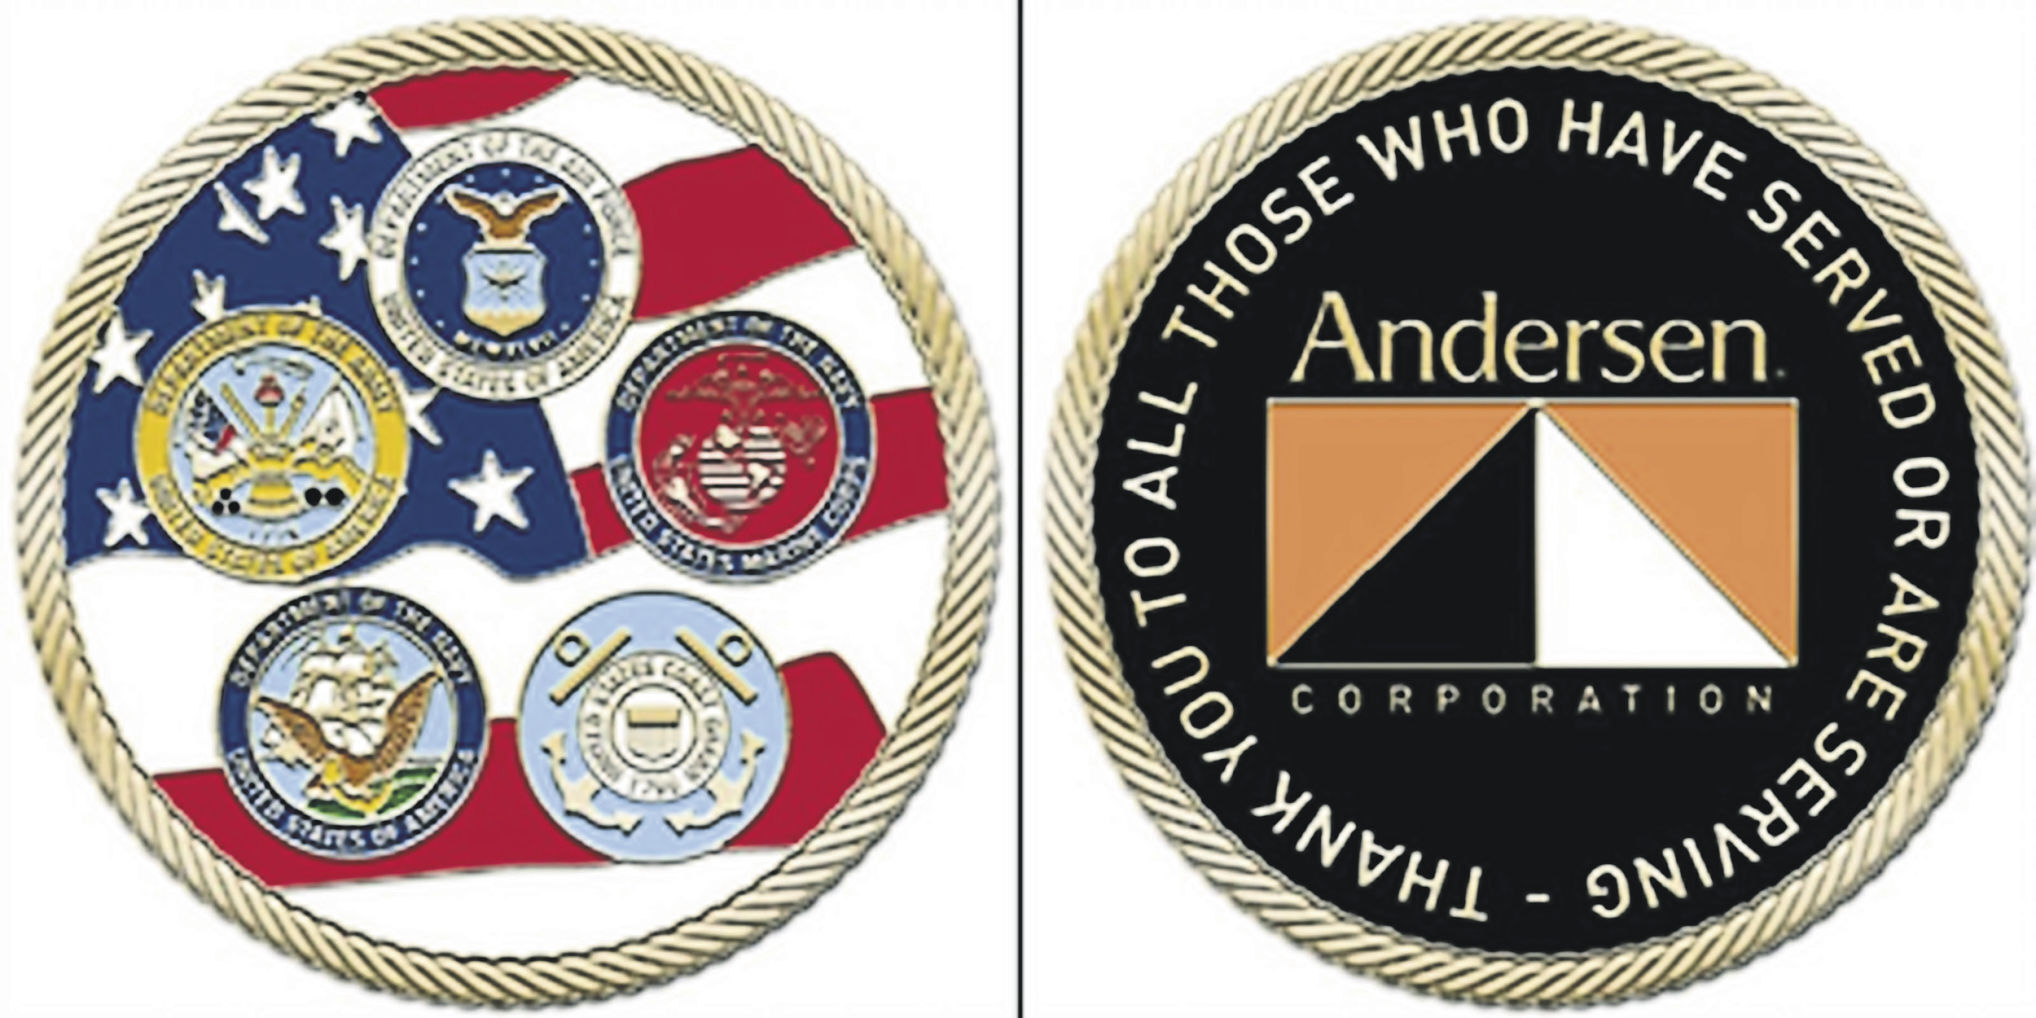 Military connections at Andersen Corp.    PHOTO CREDIT: Contributed